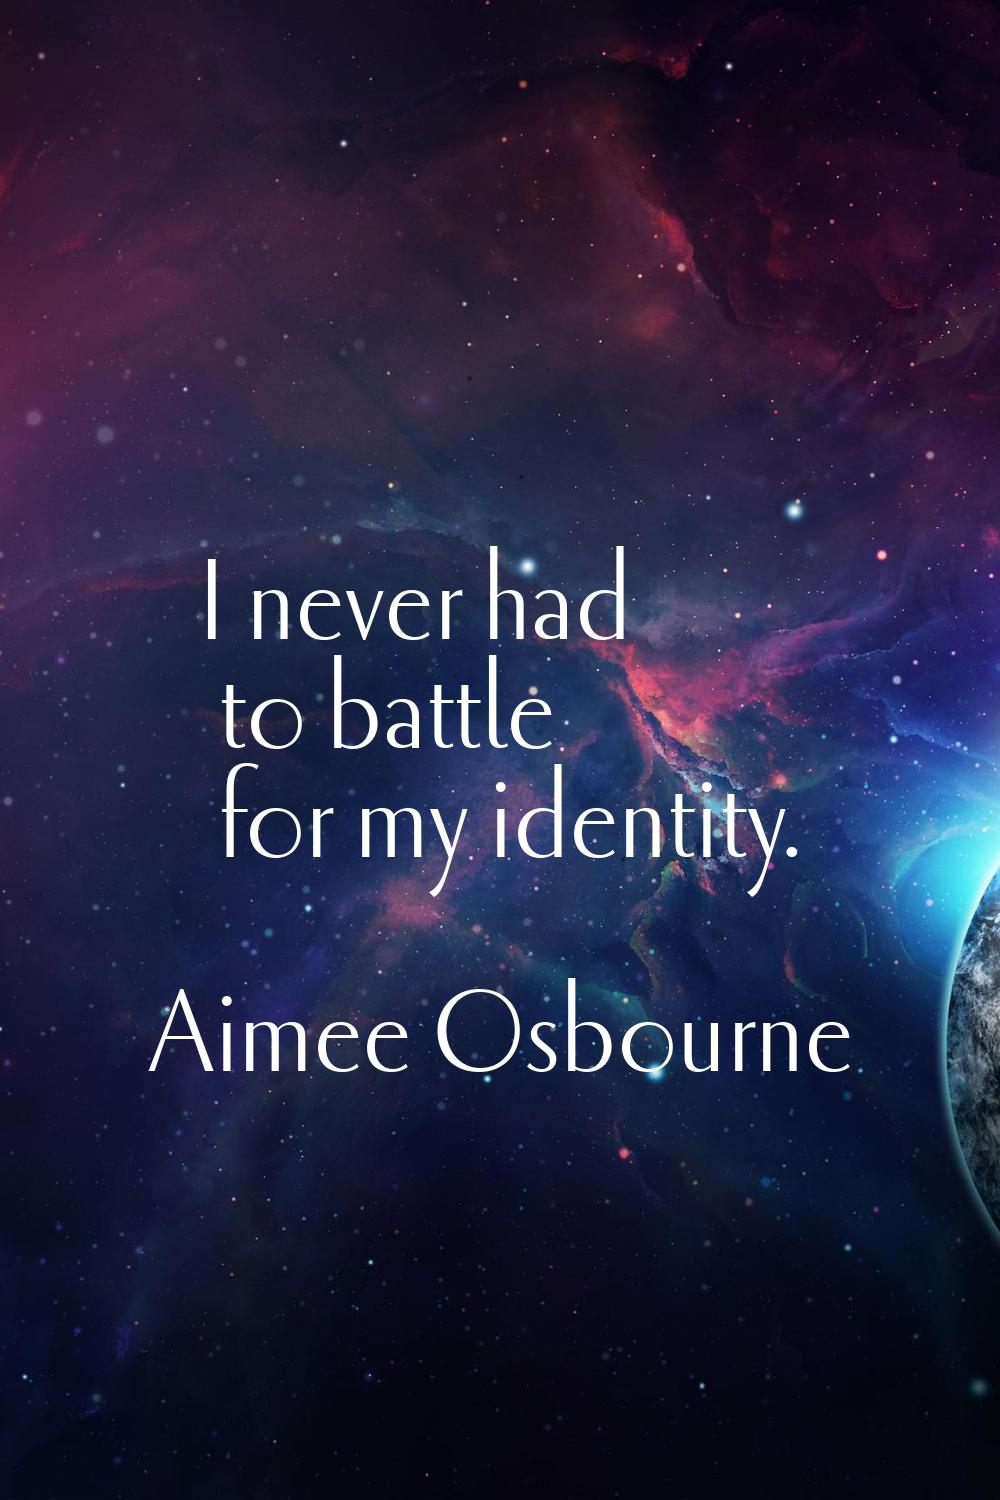 I never had to battle for my identity.